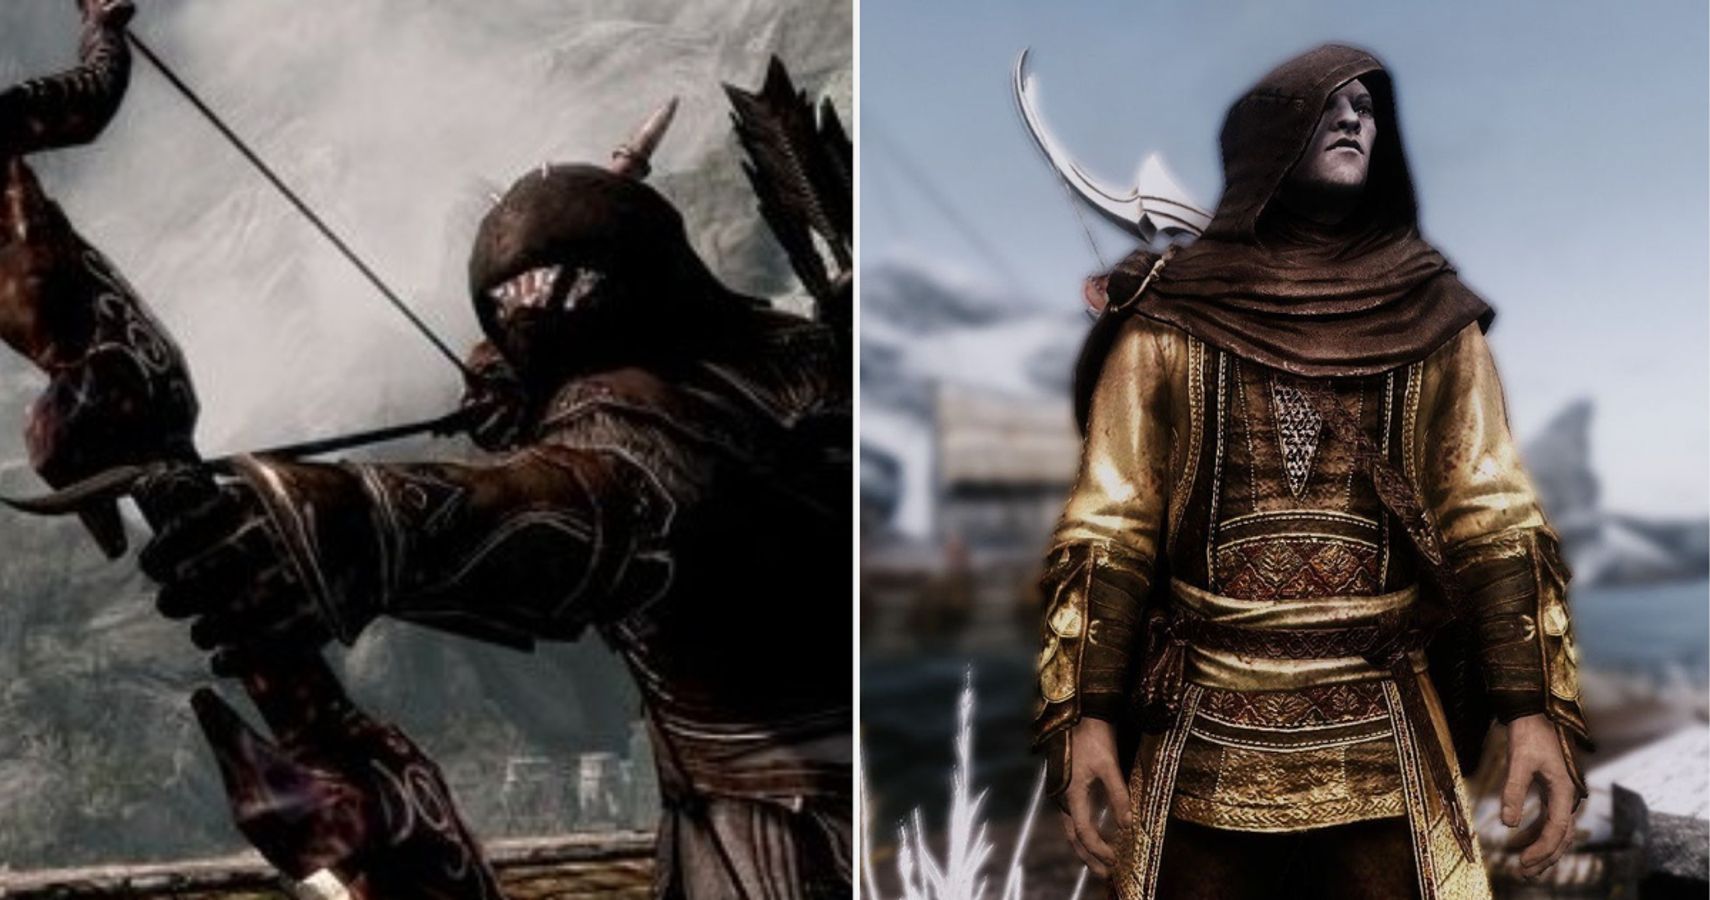 Skyrim stealth archer and a hooded assassin